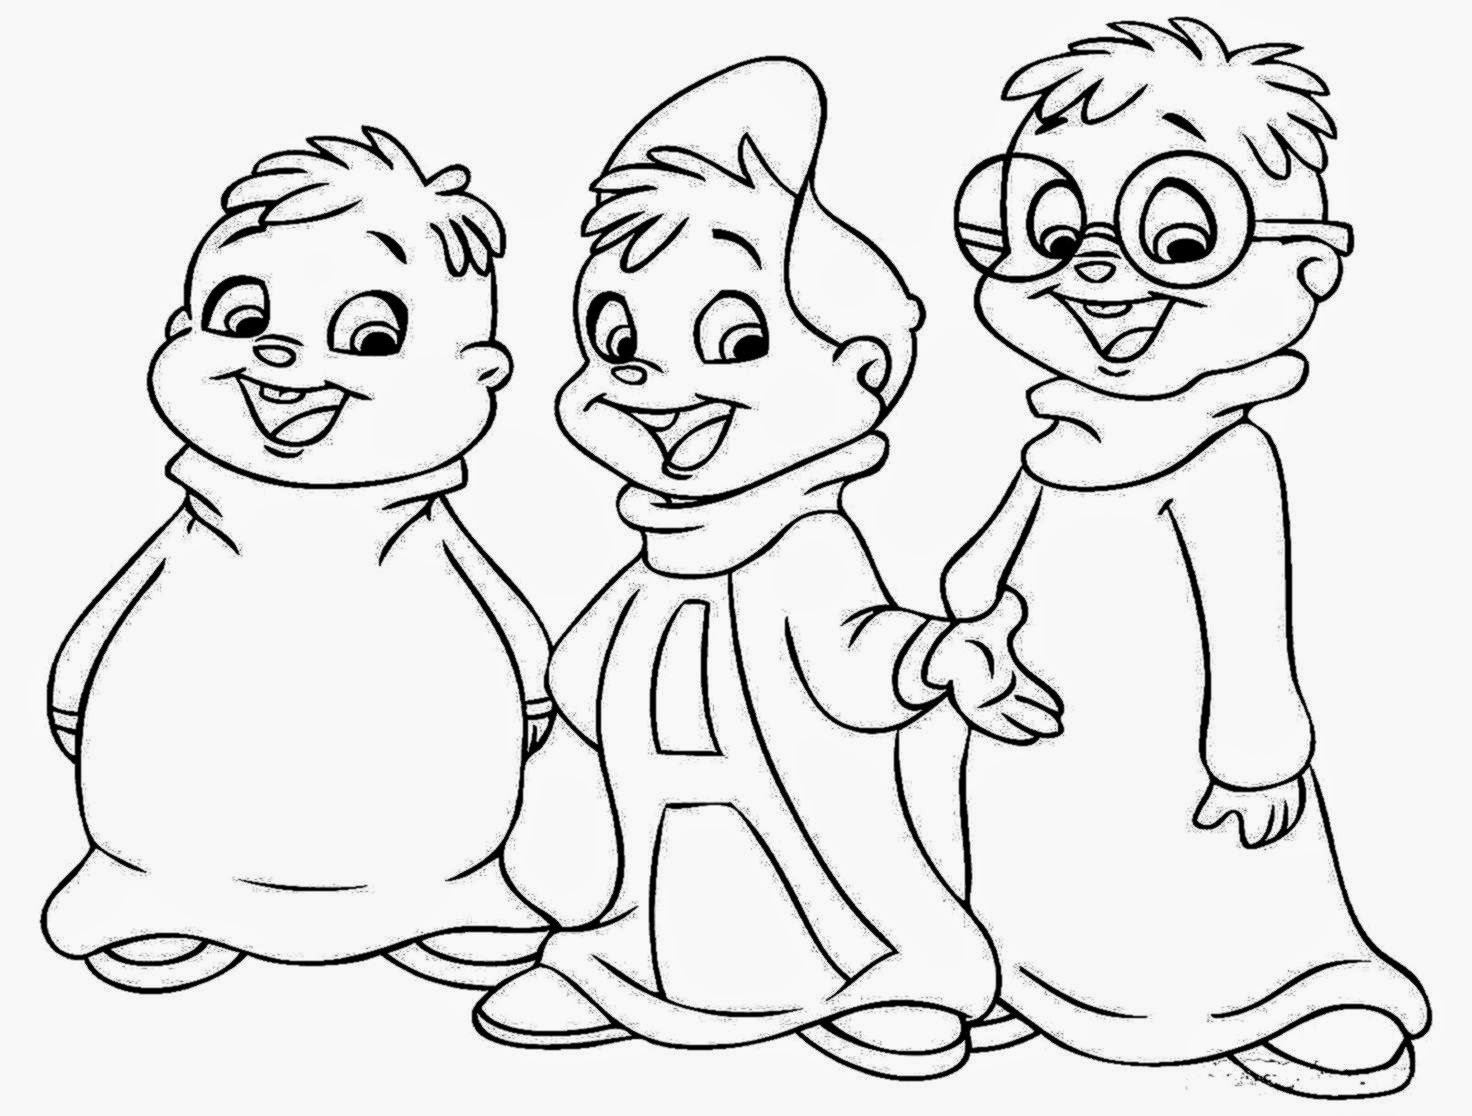 Game Coloring Pages For Kids
 Coloring Games For Kids